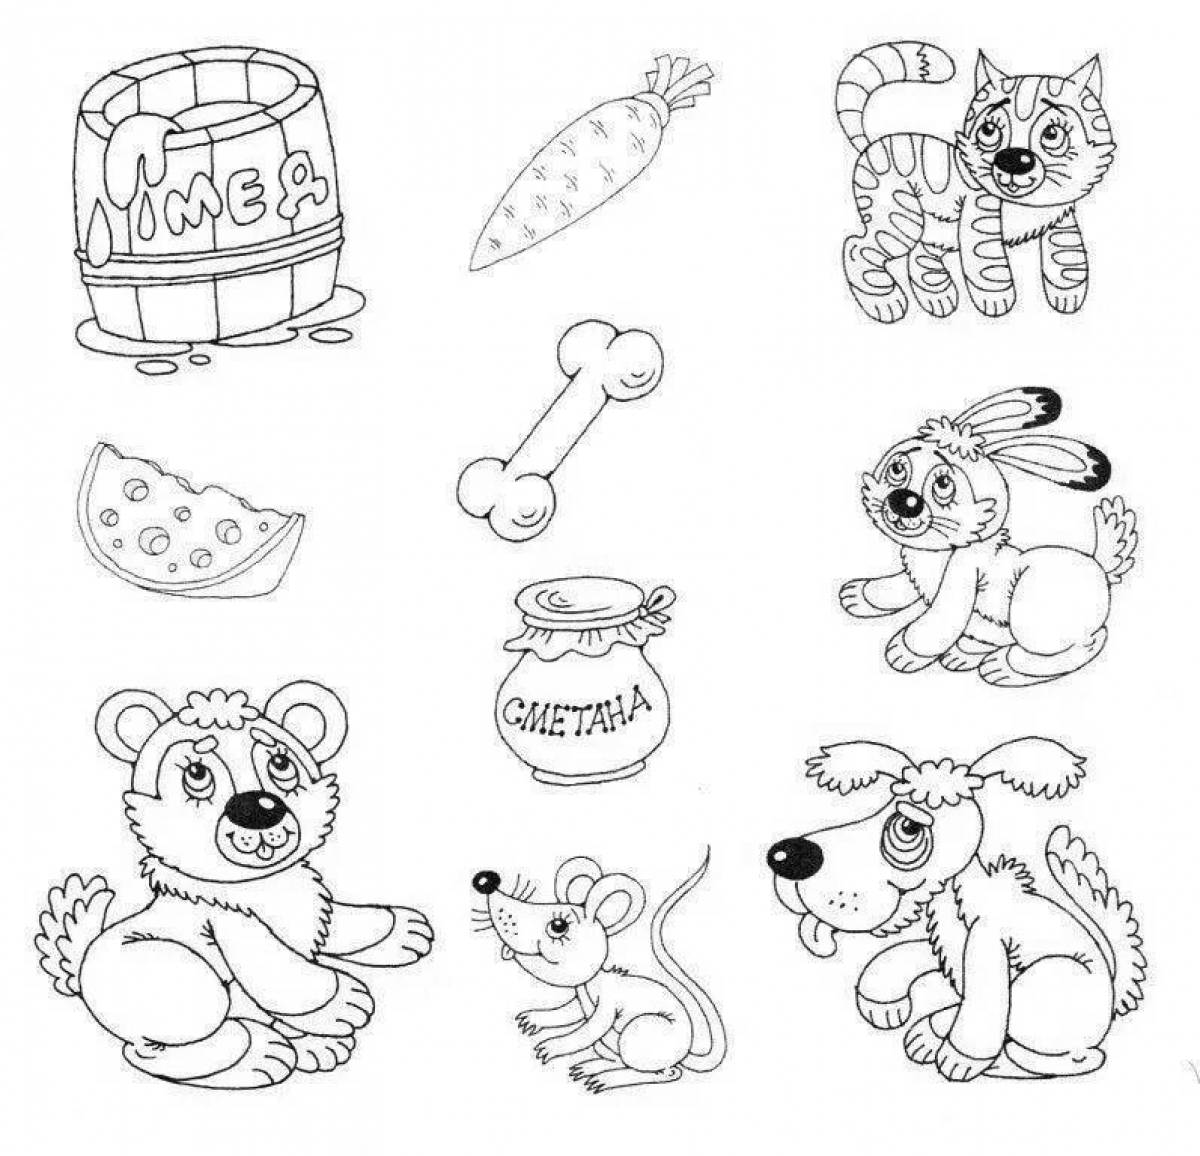 Incredible coloring page 3 task